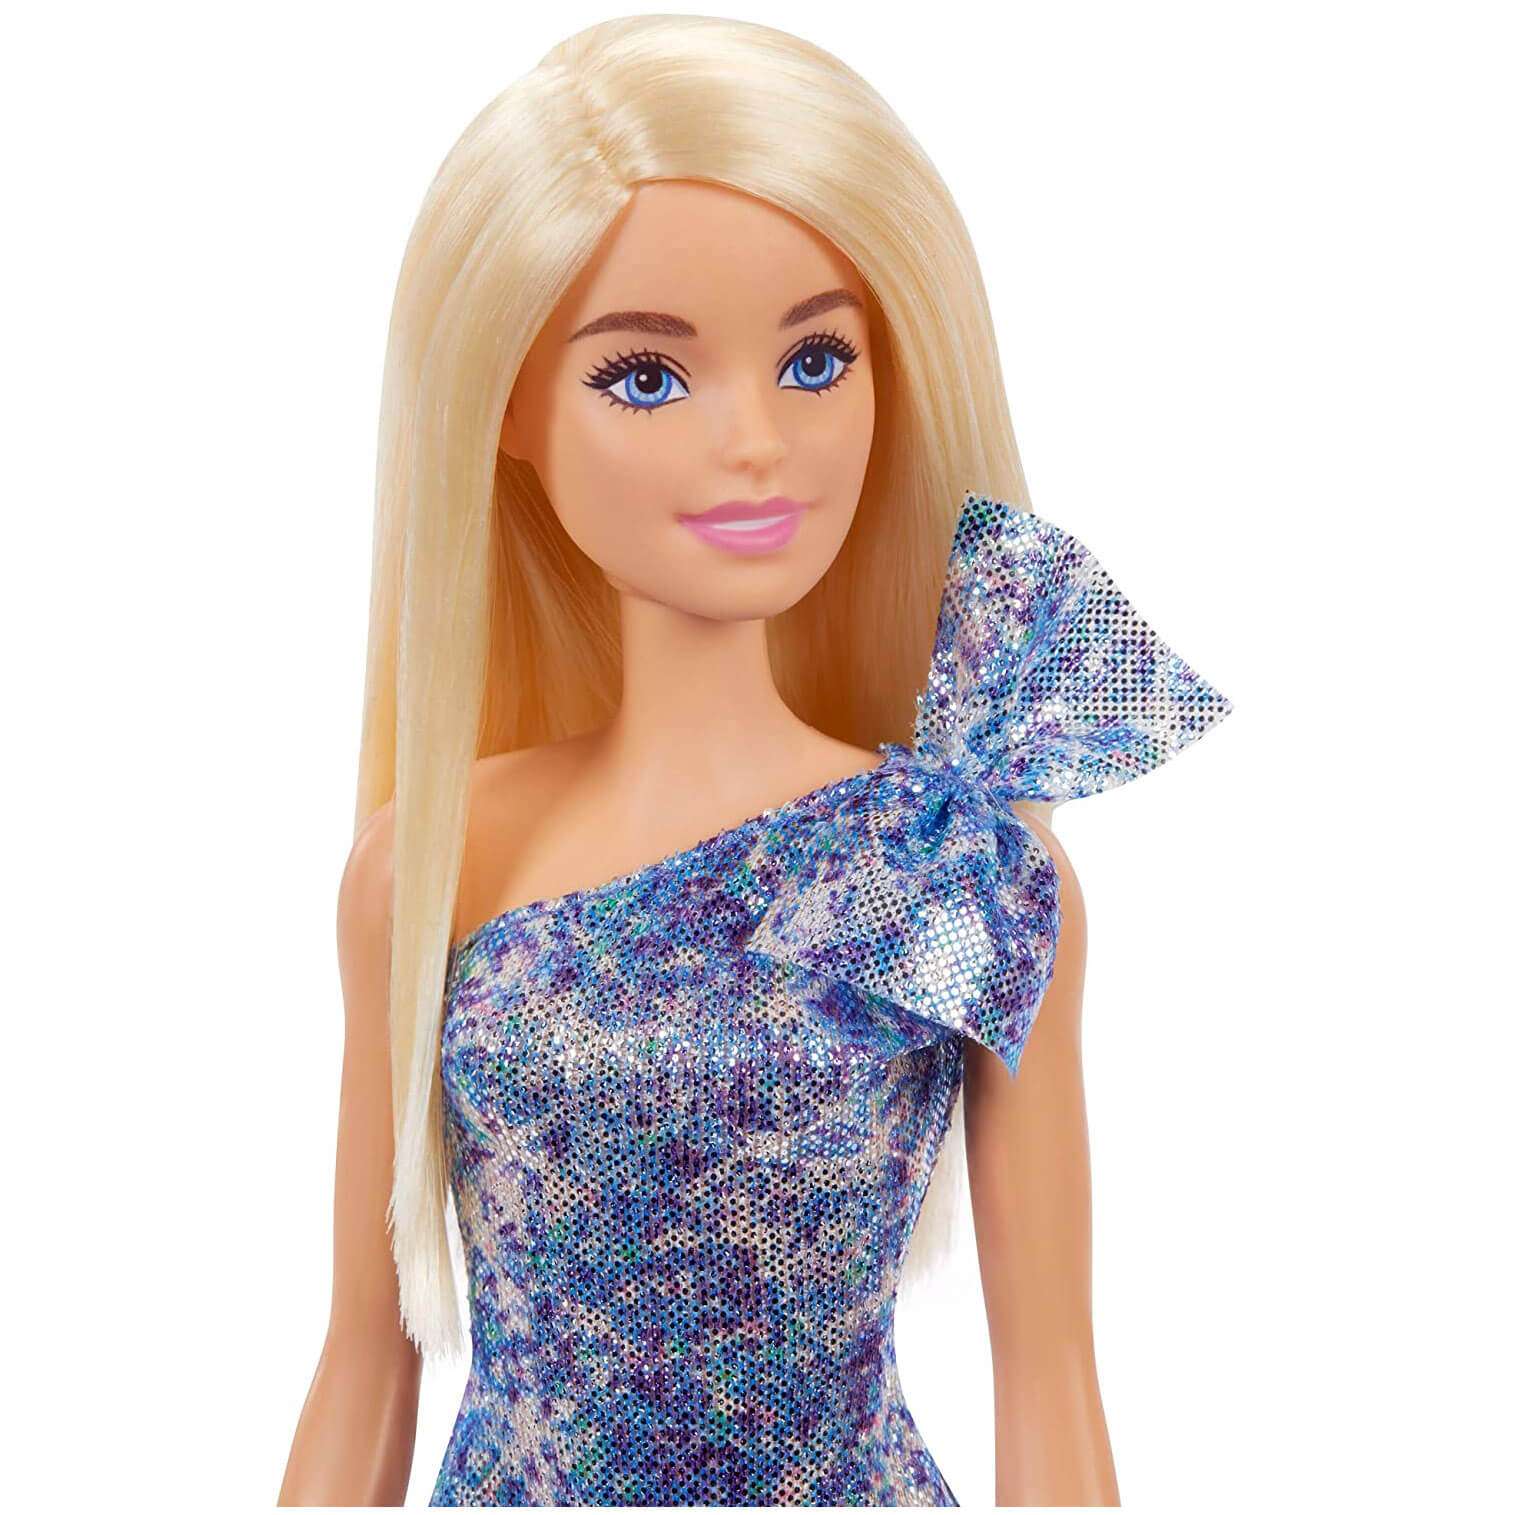 Barbie Blonde Hair Blue Eyes with Short Blue Sequins Mini Dress and Silver Platform Shoes Doll